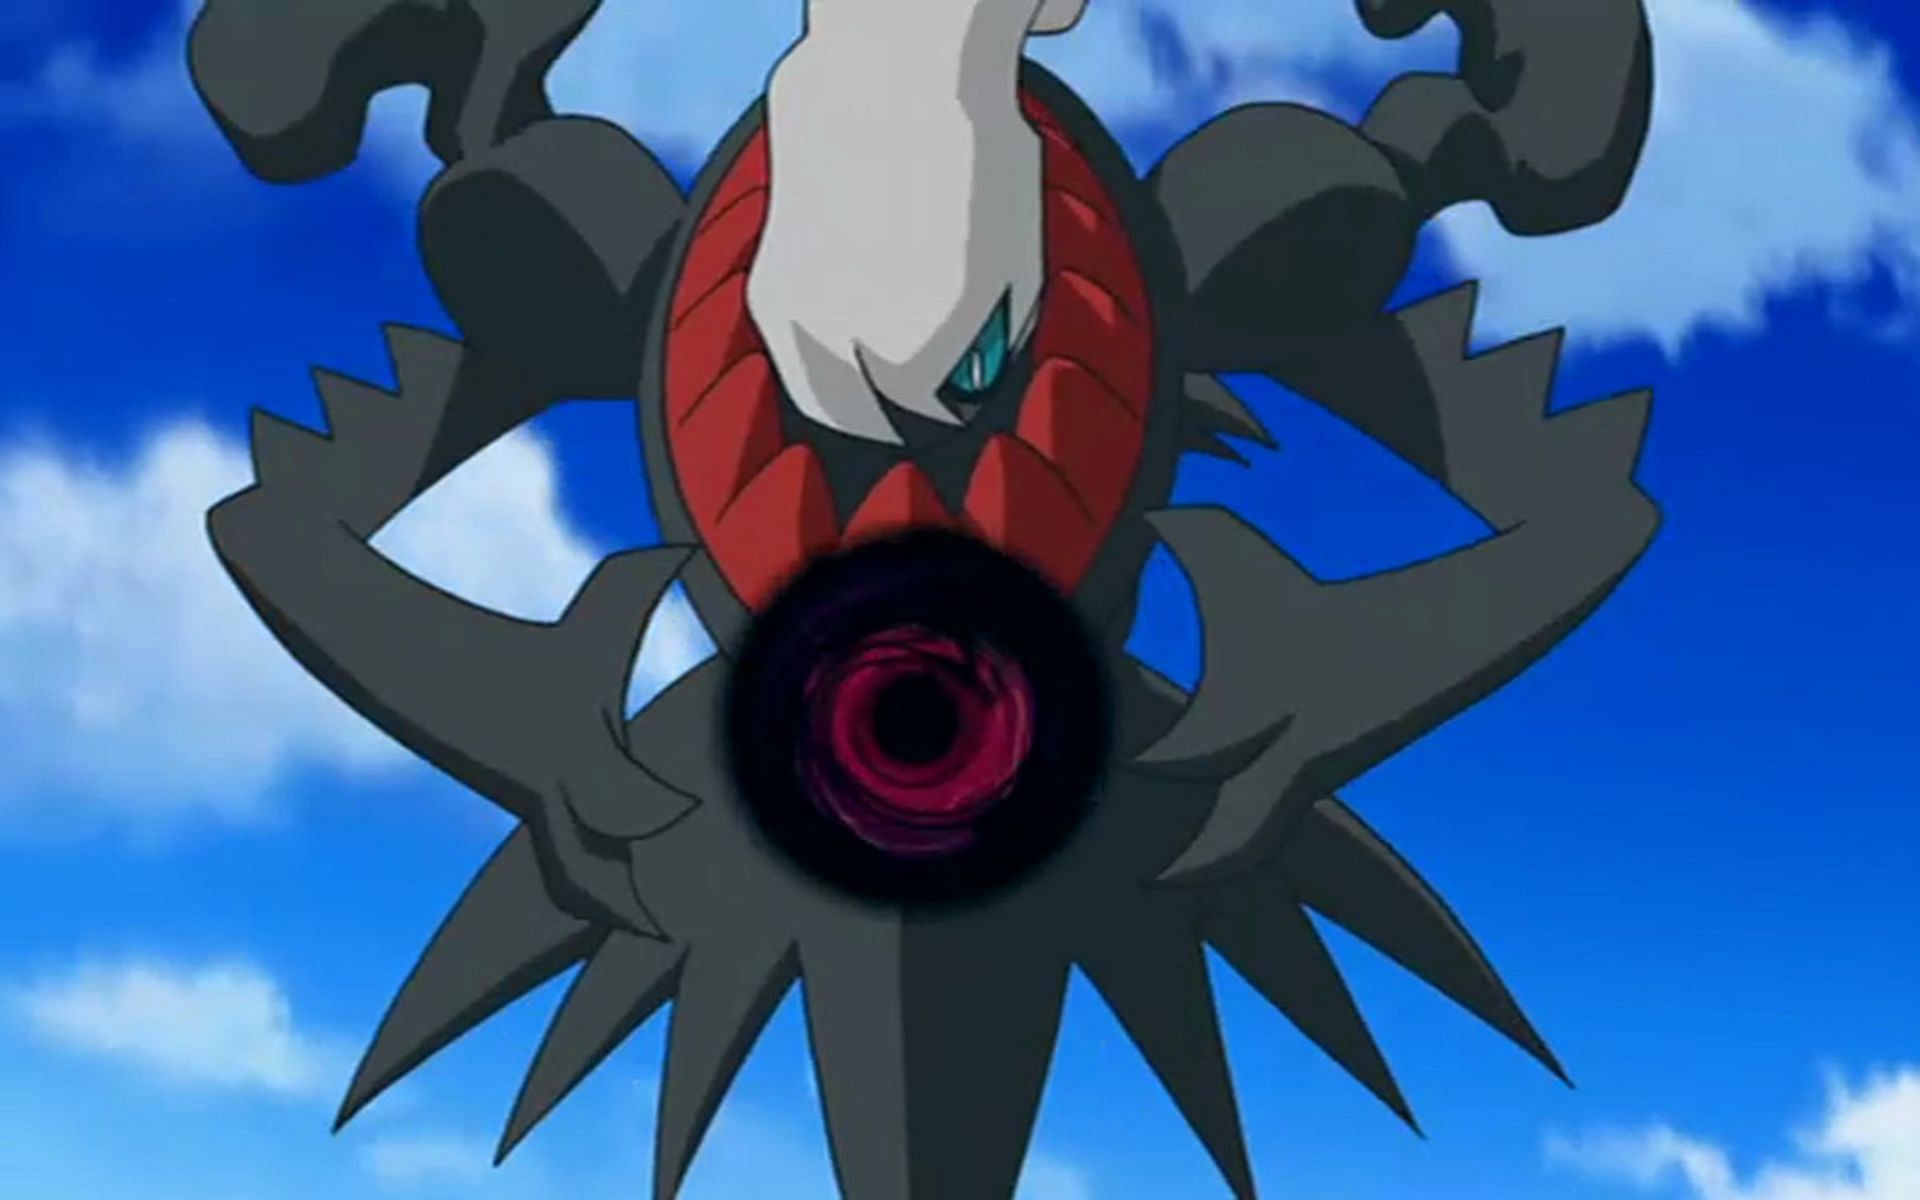 Darkrai is a Pokemon that can fire off a strong Shadow Ball (Image via The Pokemon Company)